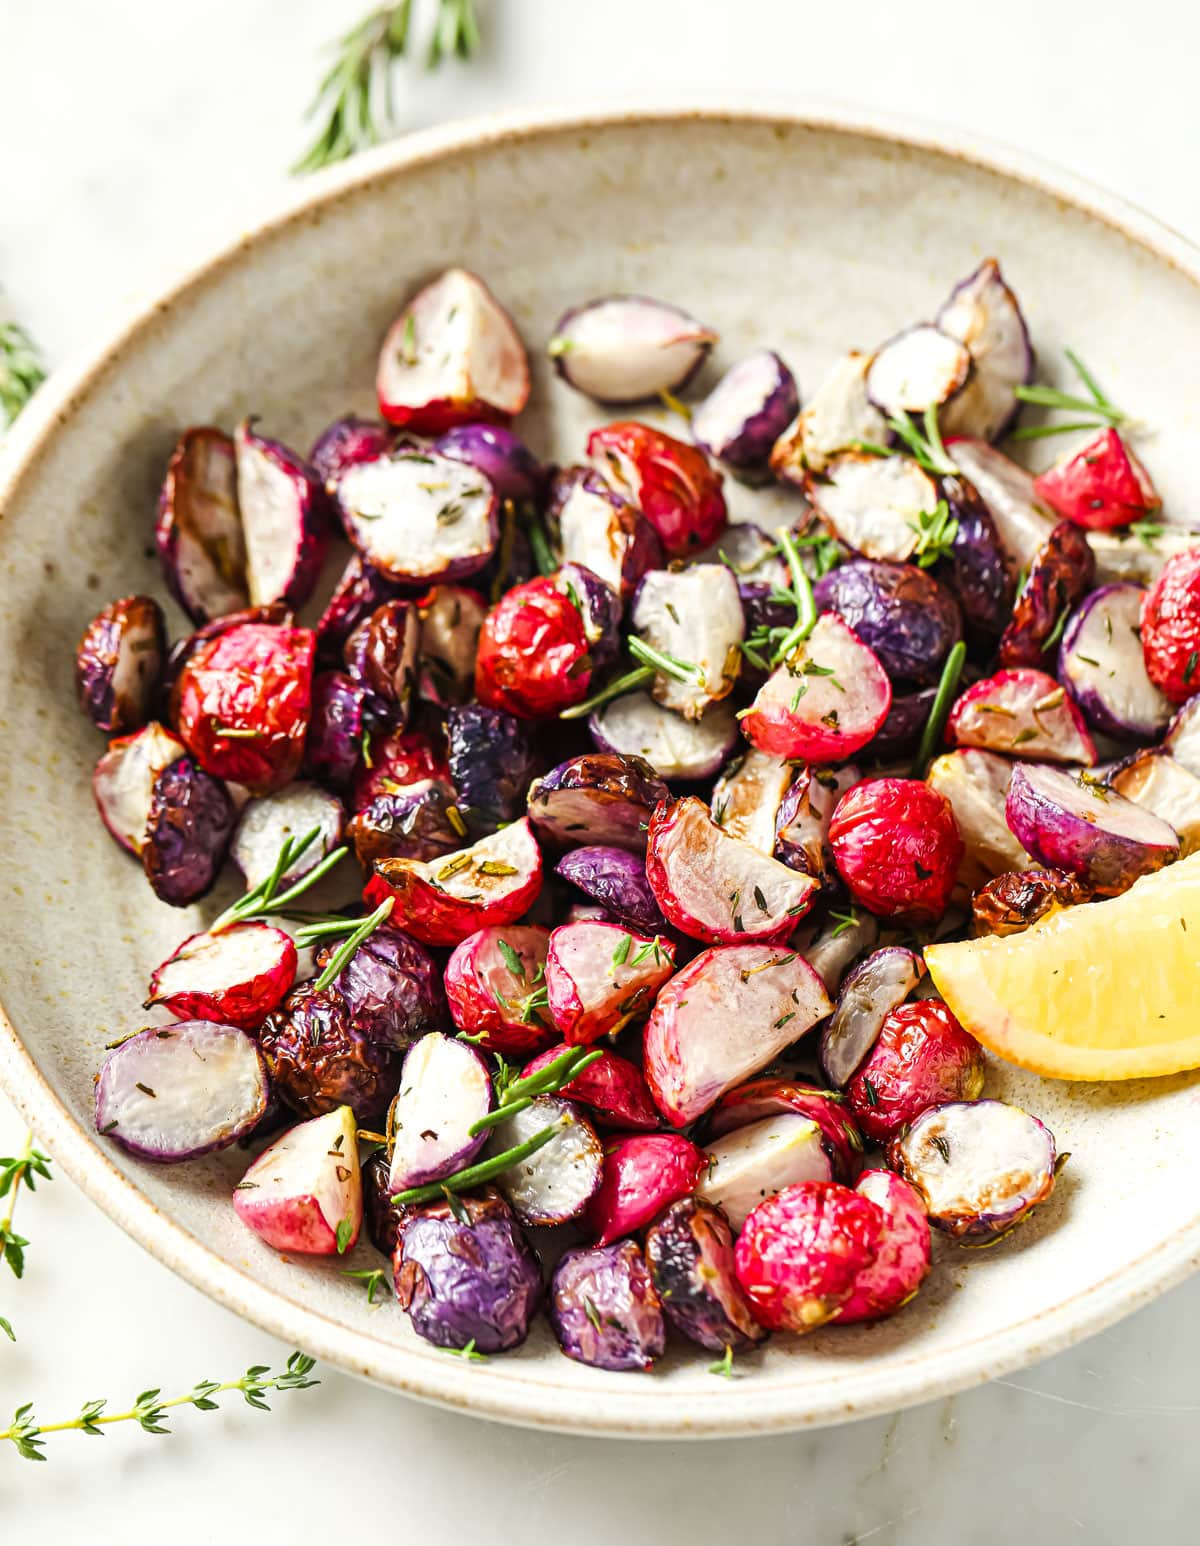 Roasted radishes in a bowl.